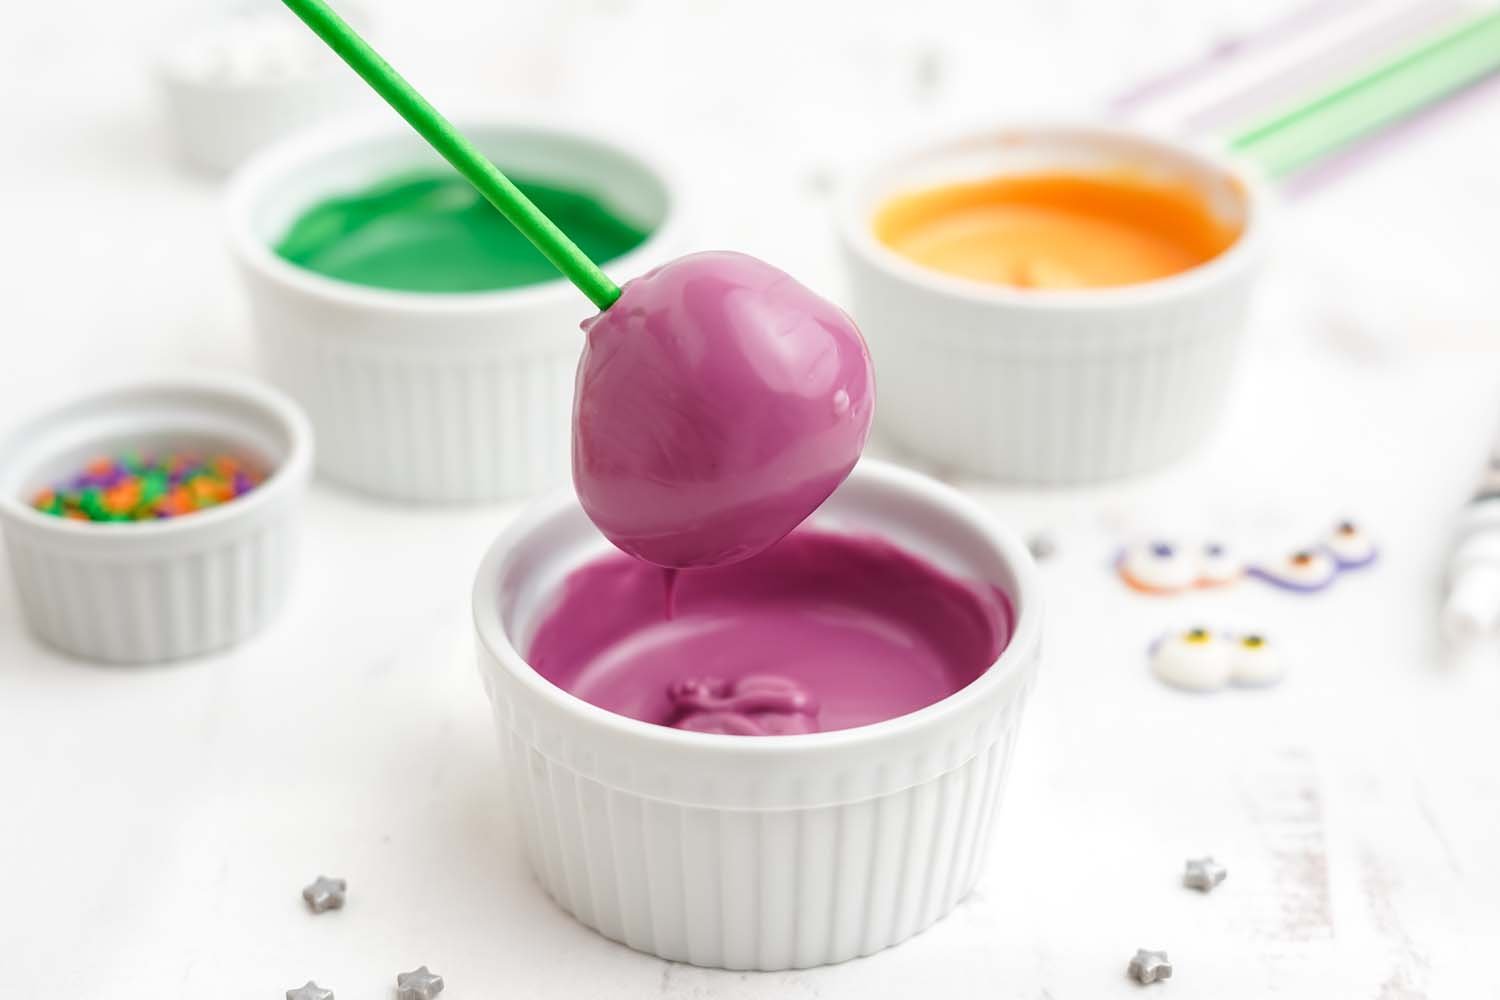 dipping donut hole into purple candy melts with other candies